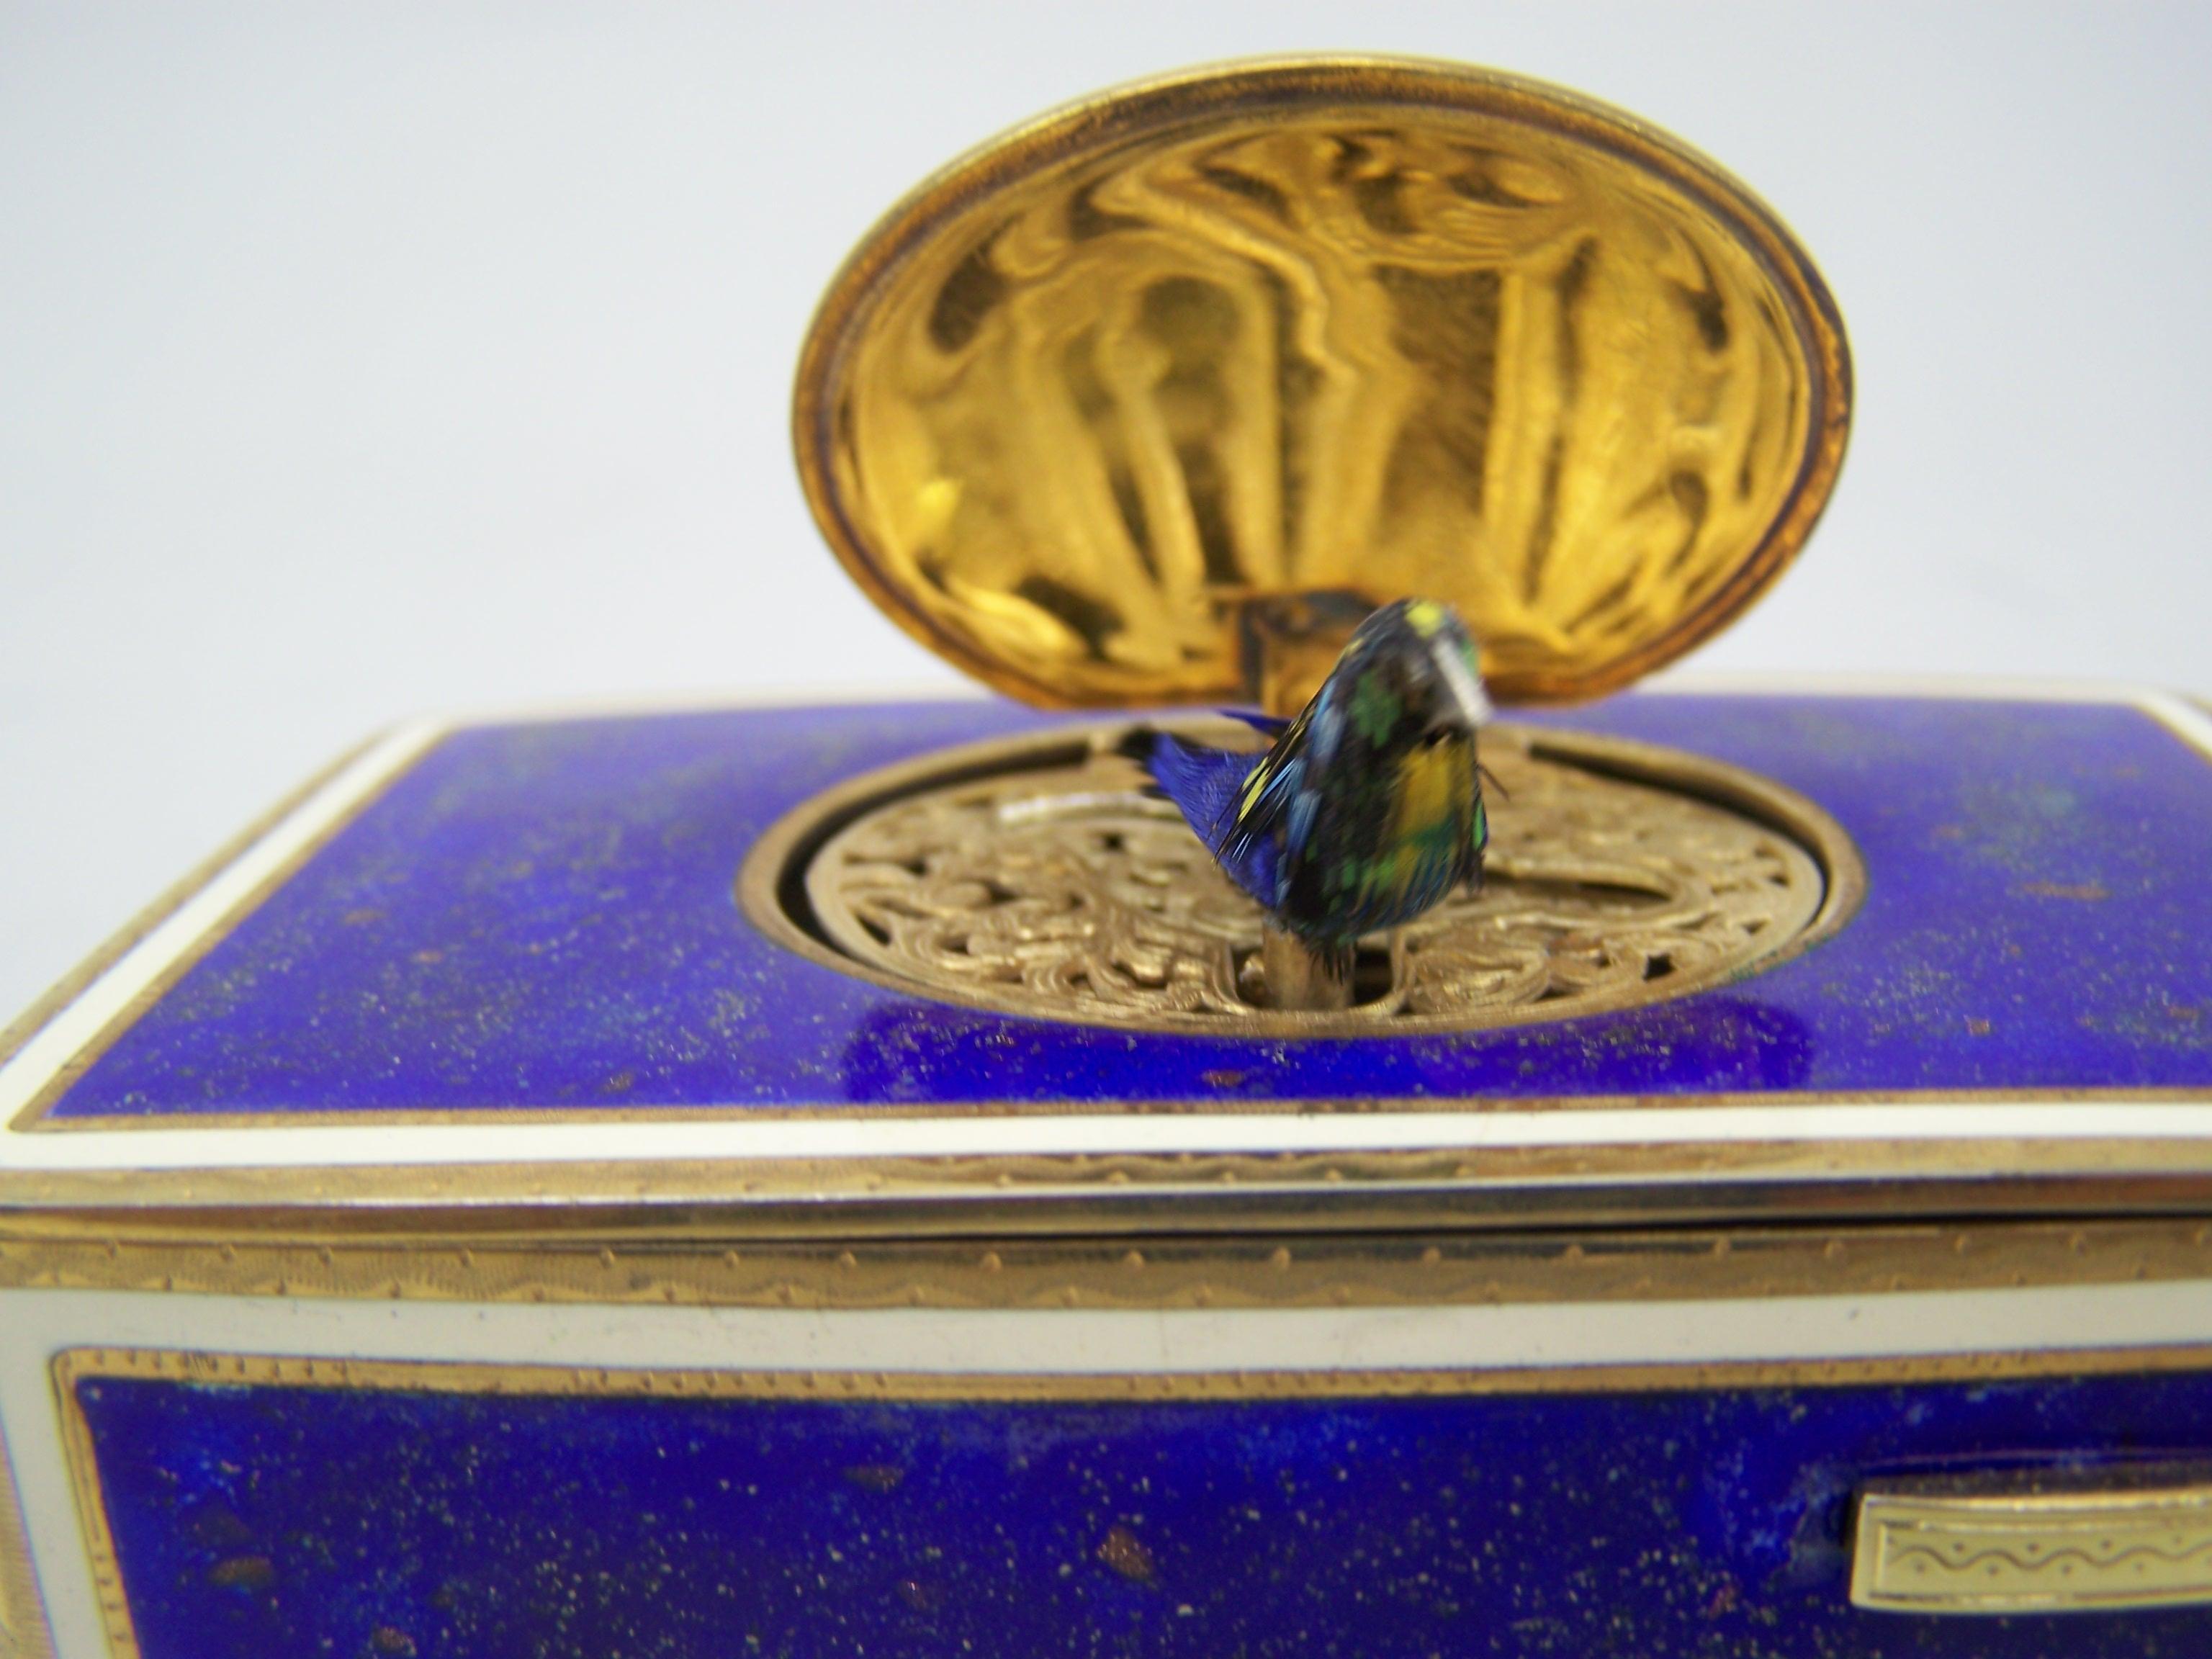 Singing bird box by K Griesbaum in guilded case and blue-goldflaked enamel 1